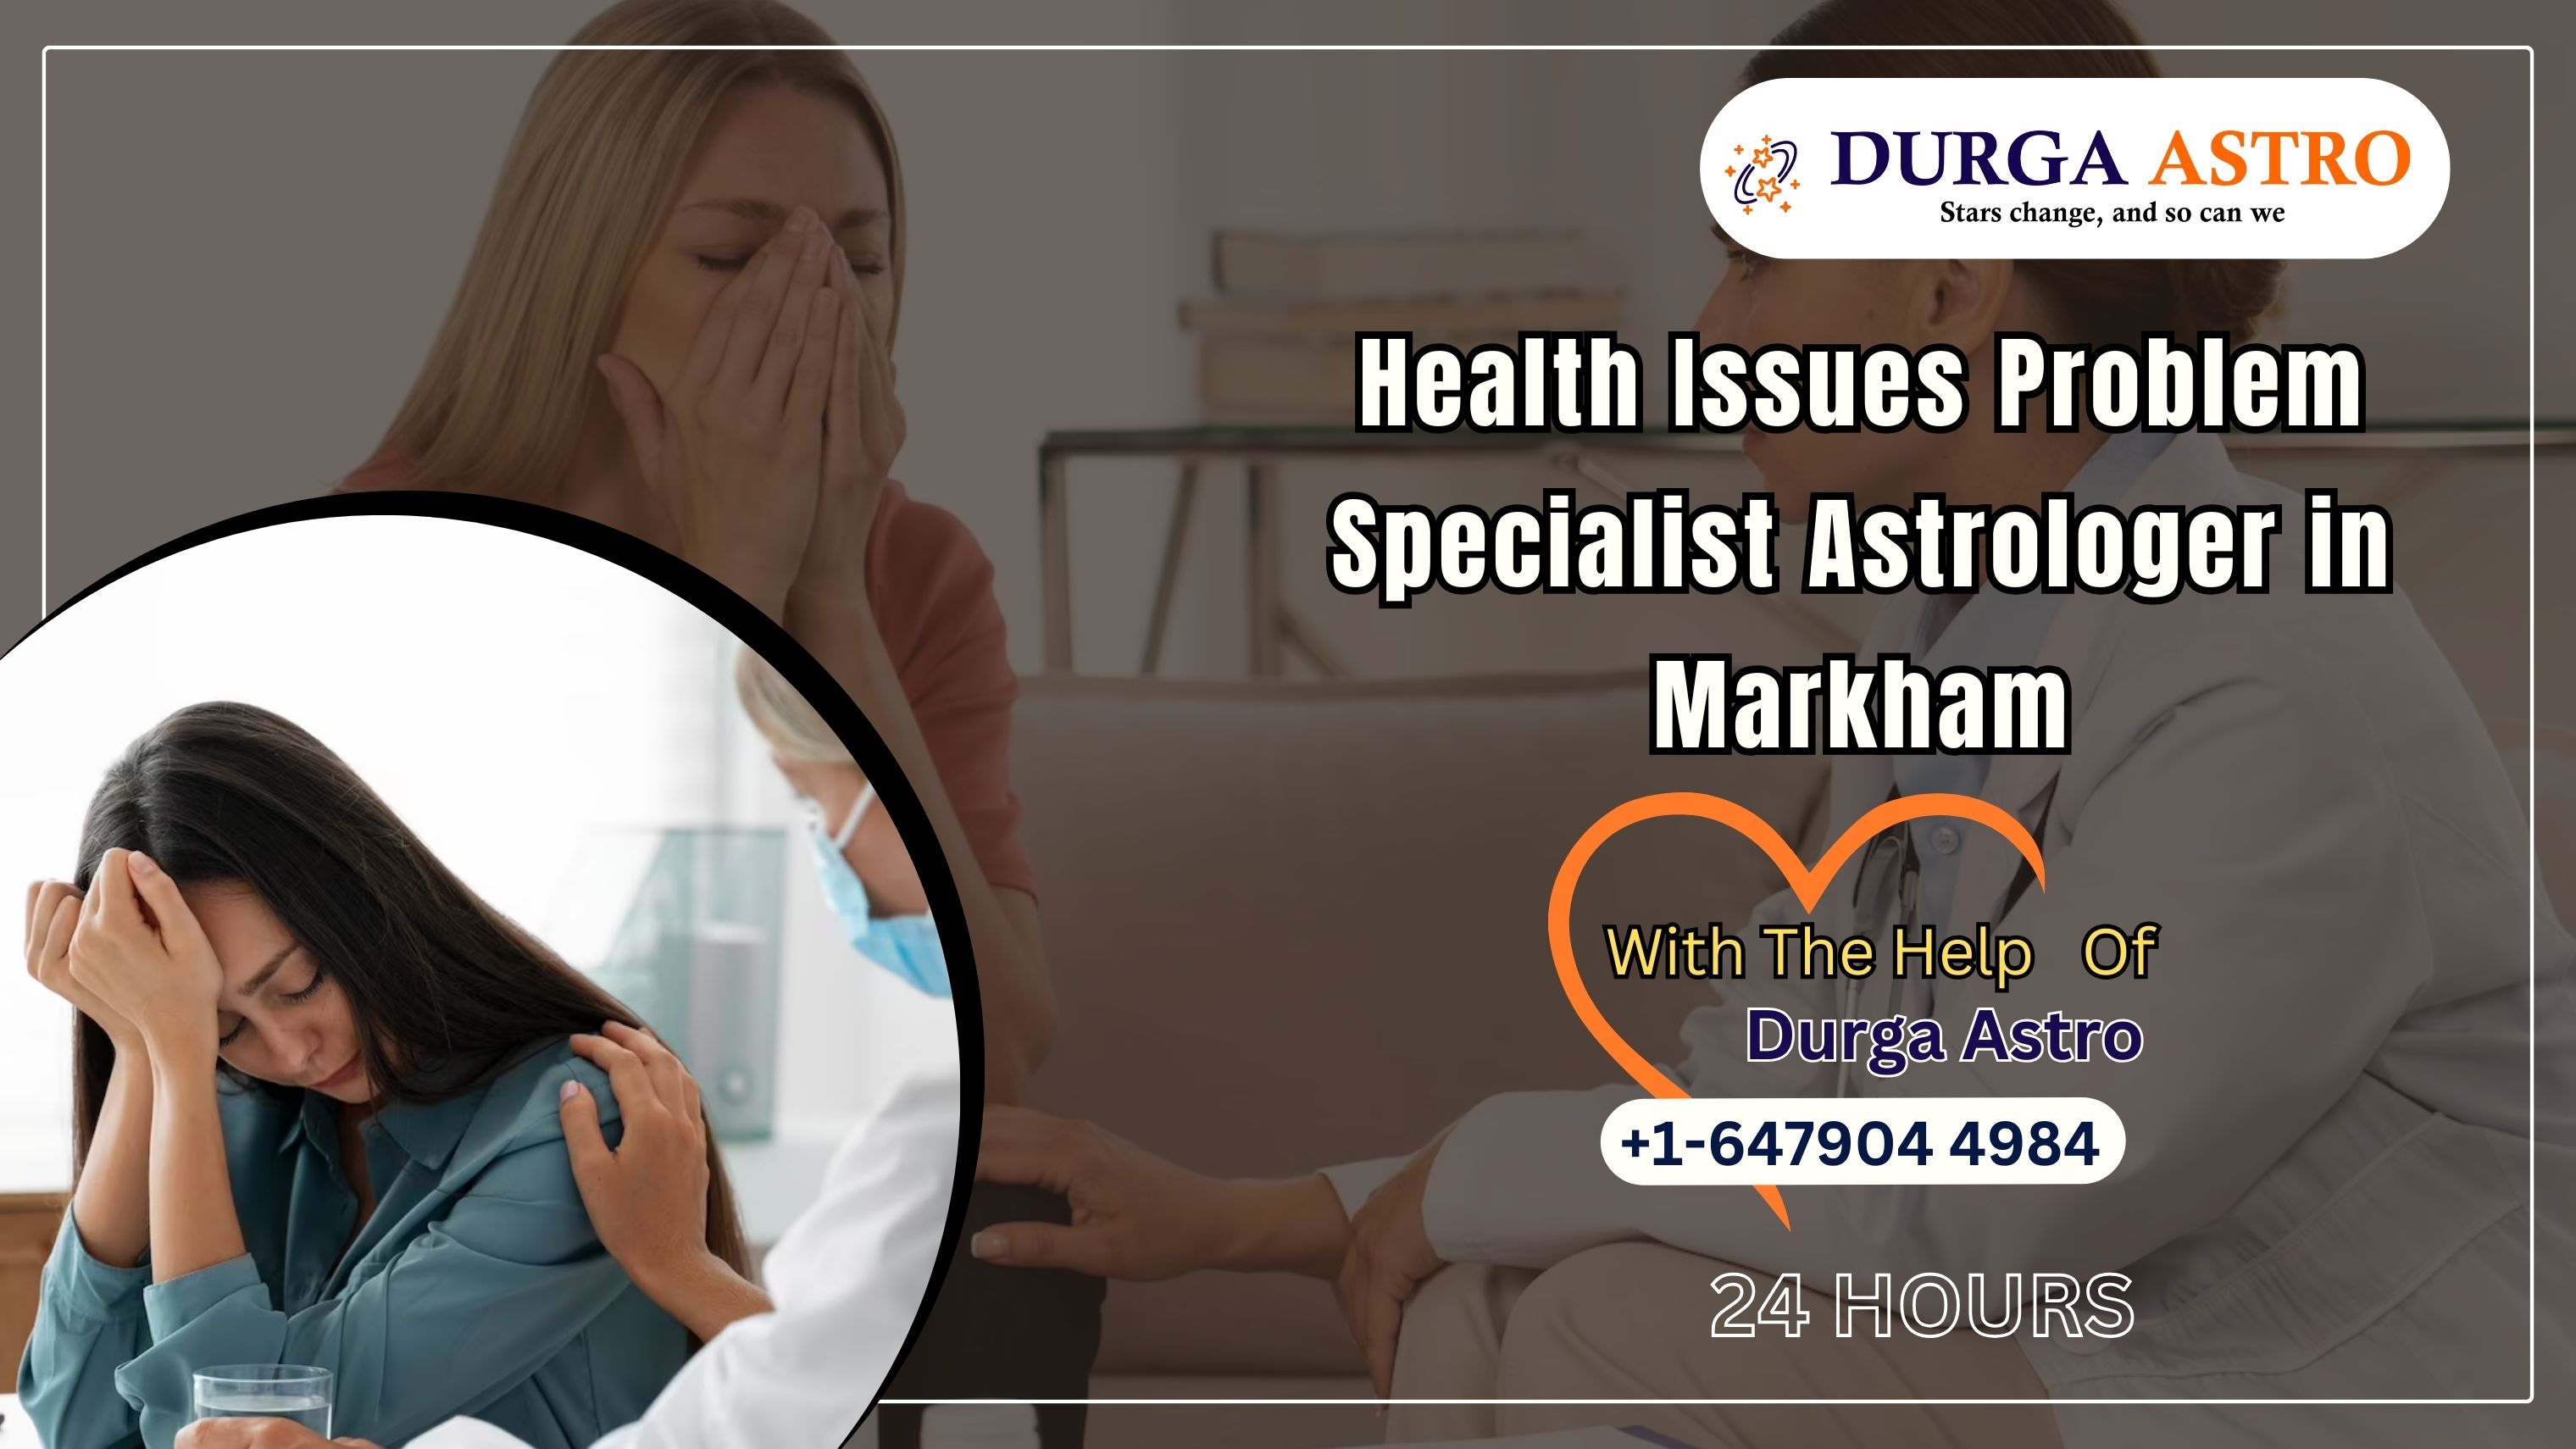 Health Issues Problem Specialist Astrologer in Markham